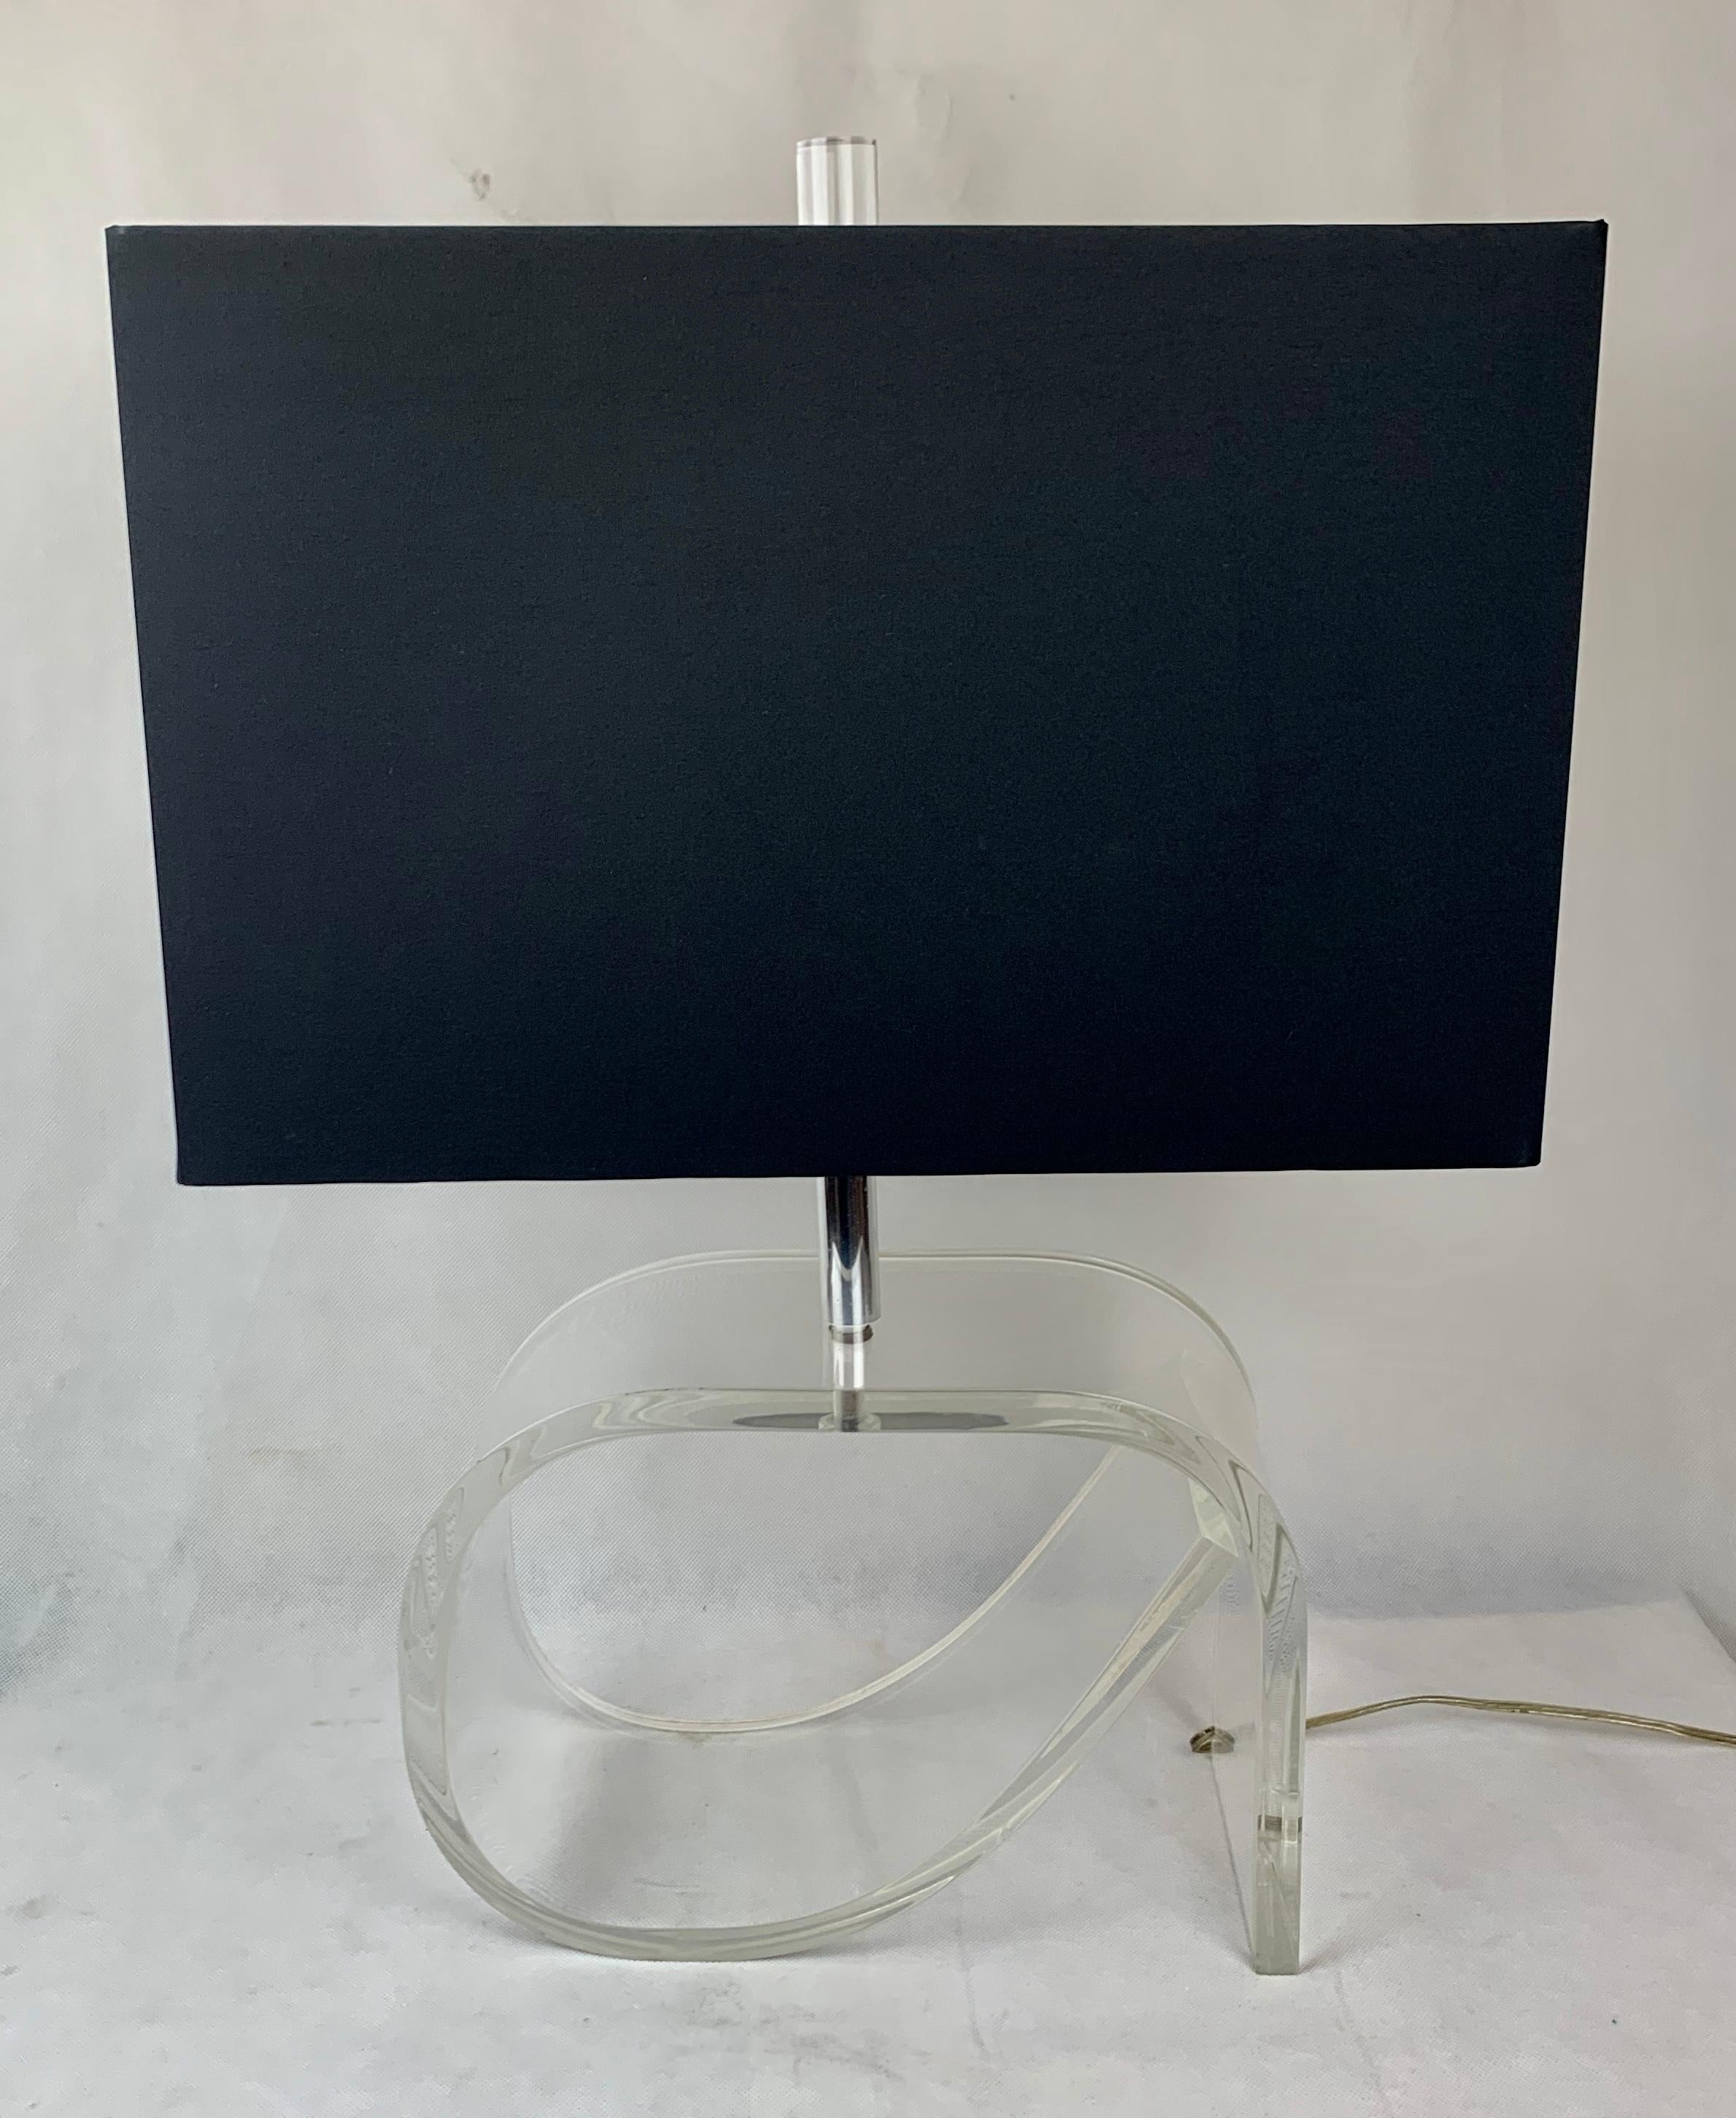 Mid century Dorothy Draper style lucite lamp with a new black rectangular shade and matching lucite finial.
This hand crafted lucite lamp is electrified in a unique way. On the back side a small channel is made in the lucite panel edge just narrow